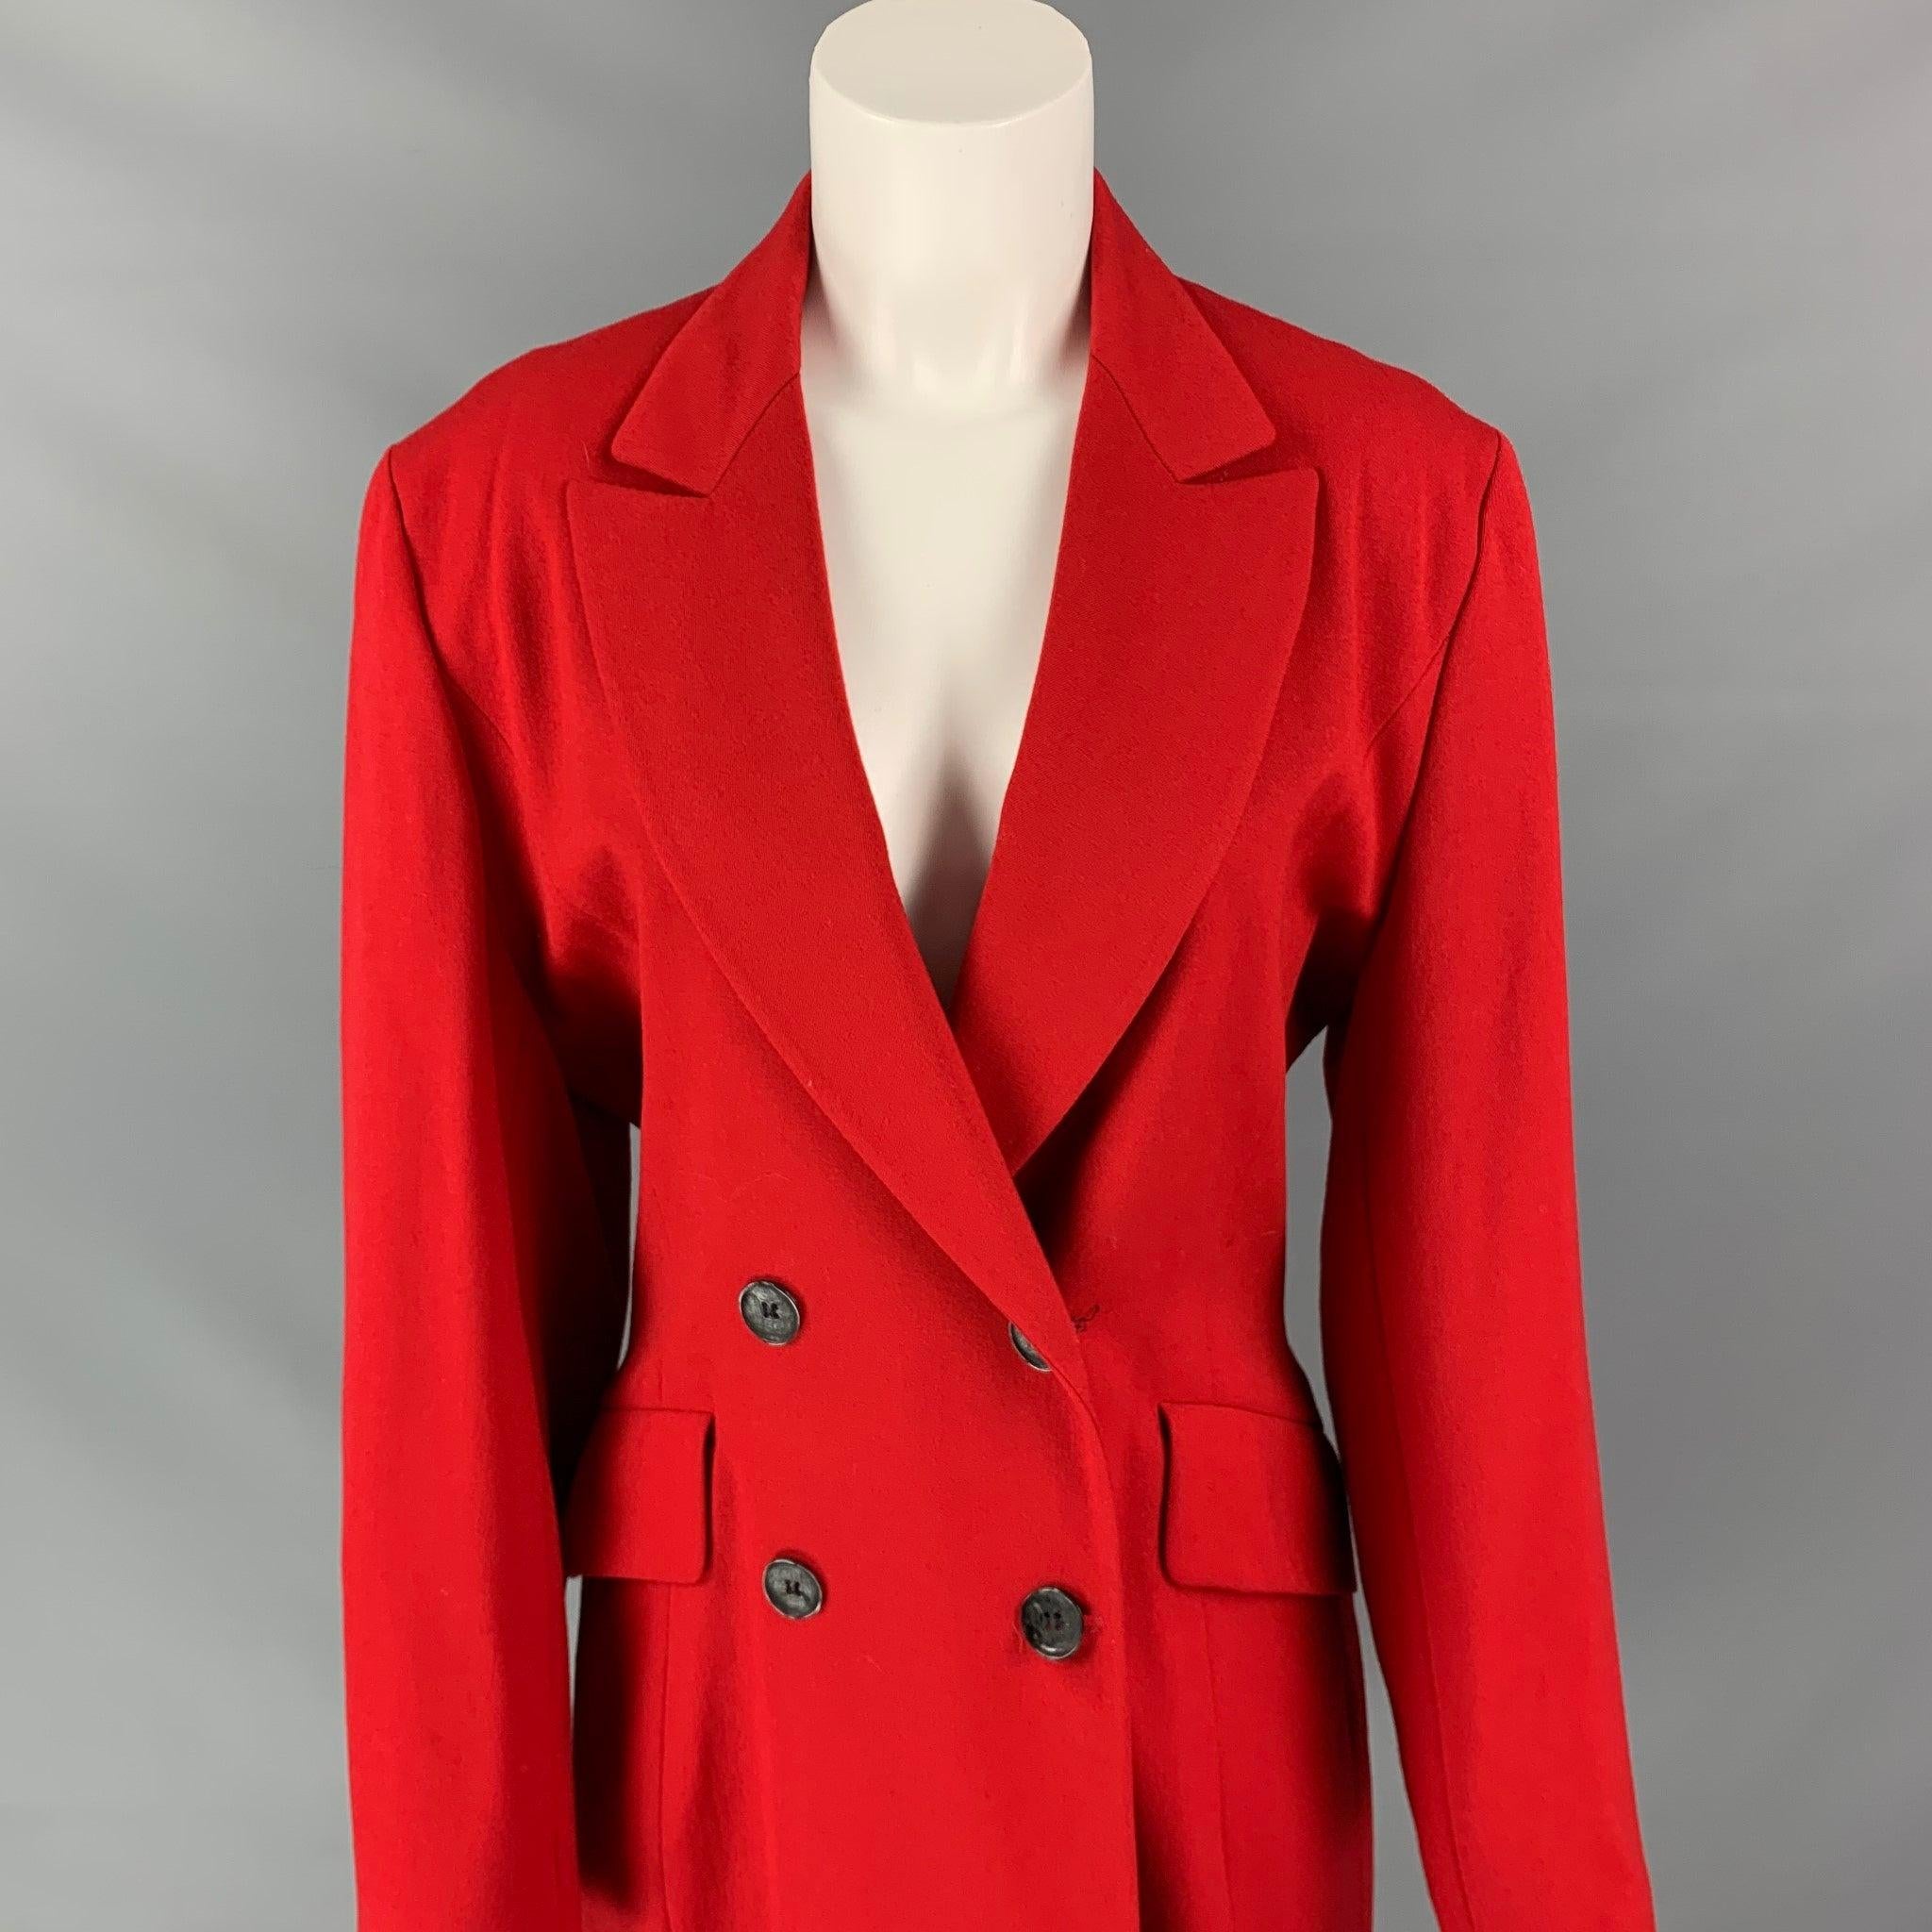 JOSEPH coat comes in a red wool with a full liner featuring a peak lapel, flap pockets, and a double breasted closure. Made in France.
Very Good
Pre-Owned Condition. 

Marked:  2 

Measurements: 
 
Shoulder: 16.5 inches Bust: 38 inches Sleeve: 25